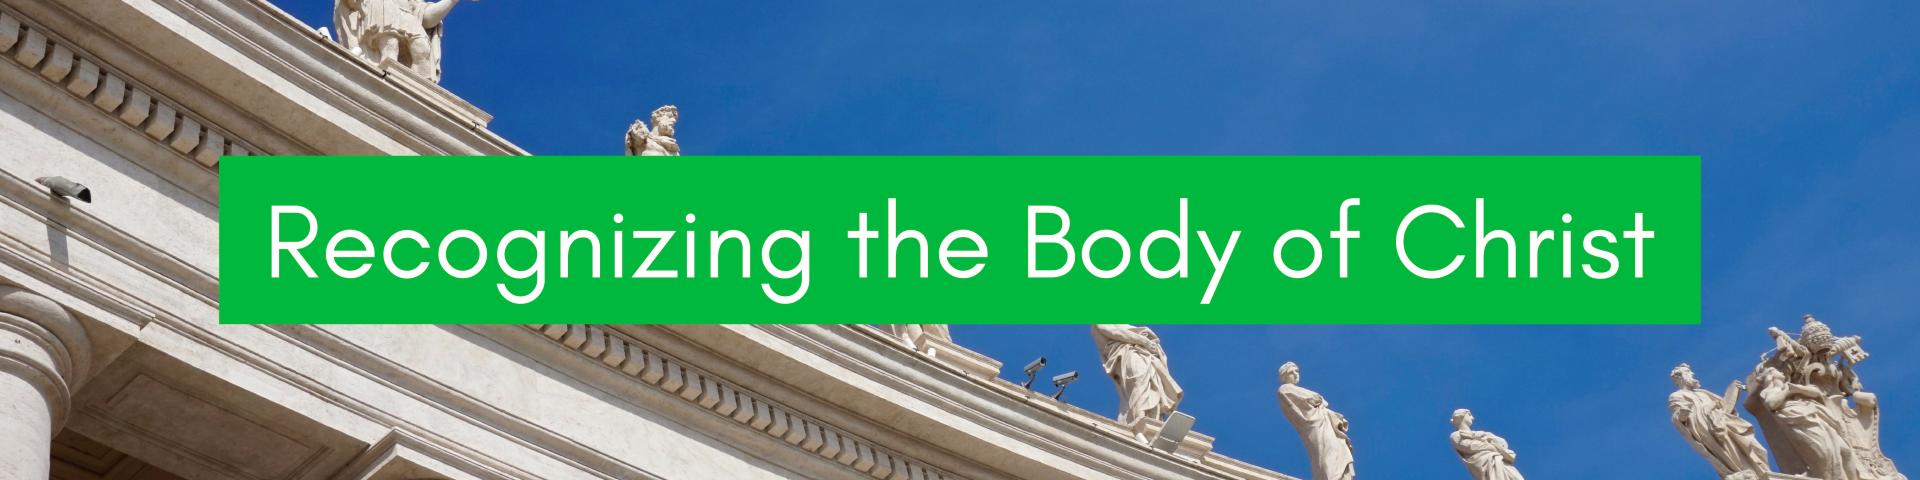 Recognizing the Body of Christ 